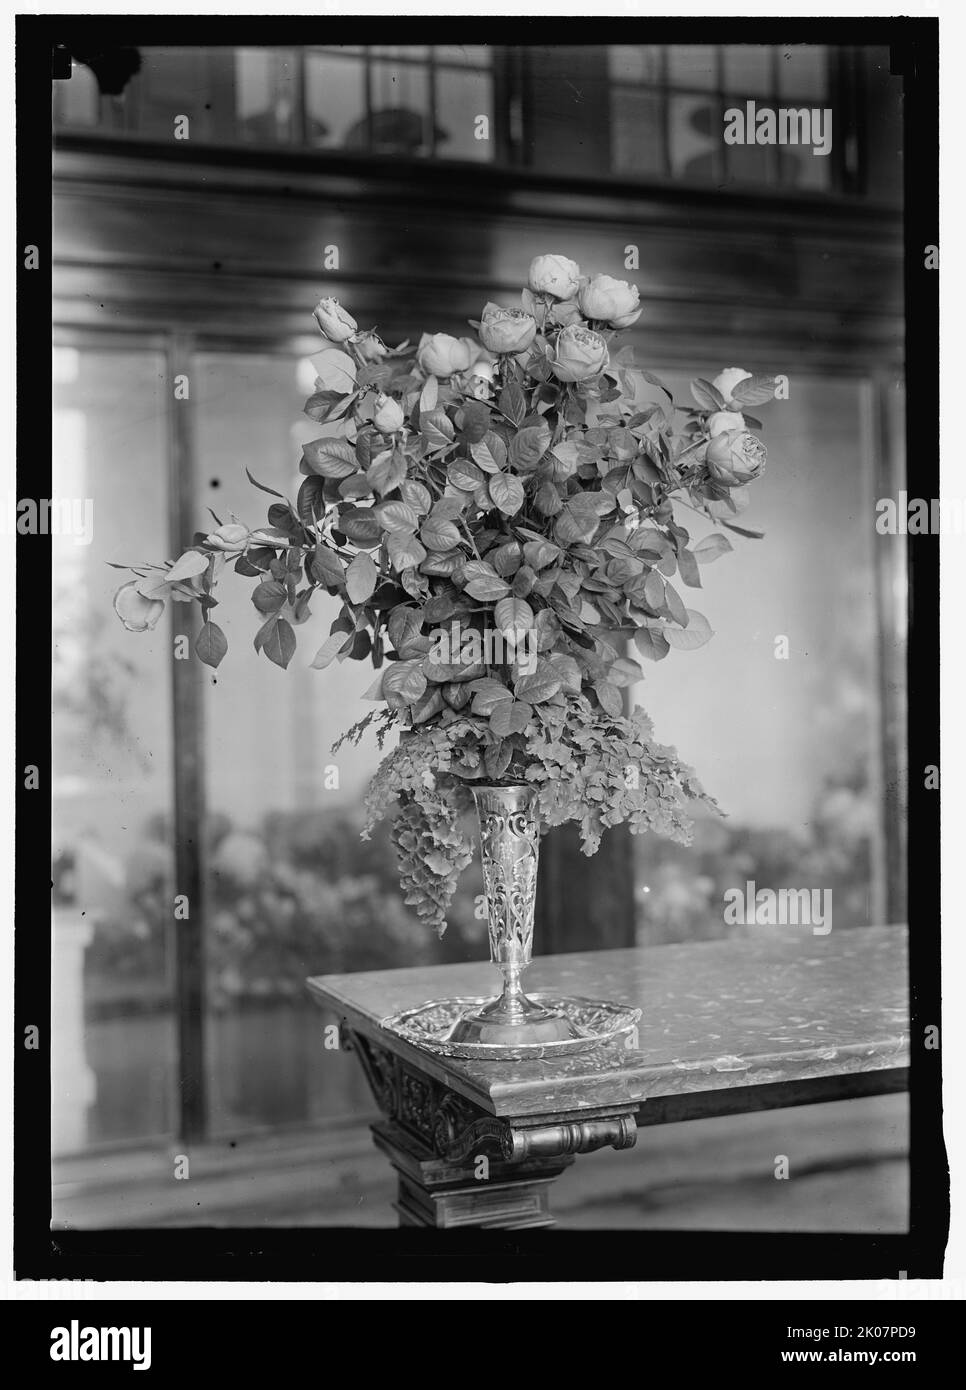 Bouquet, between 1911 and 1920. Stock Photo